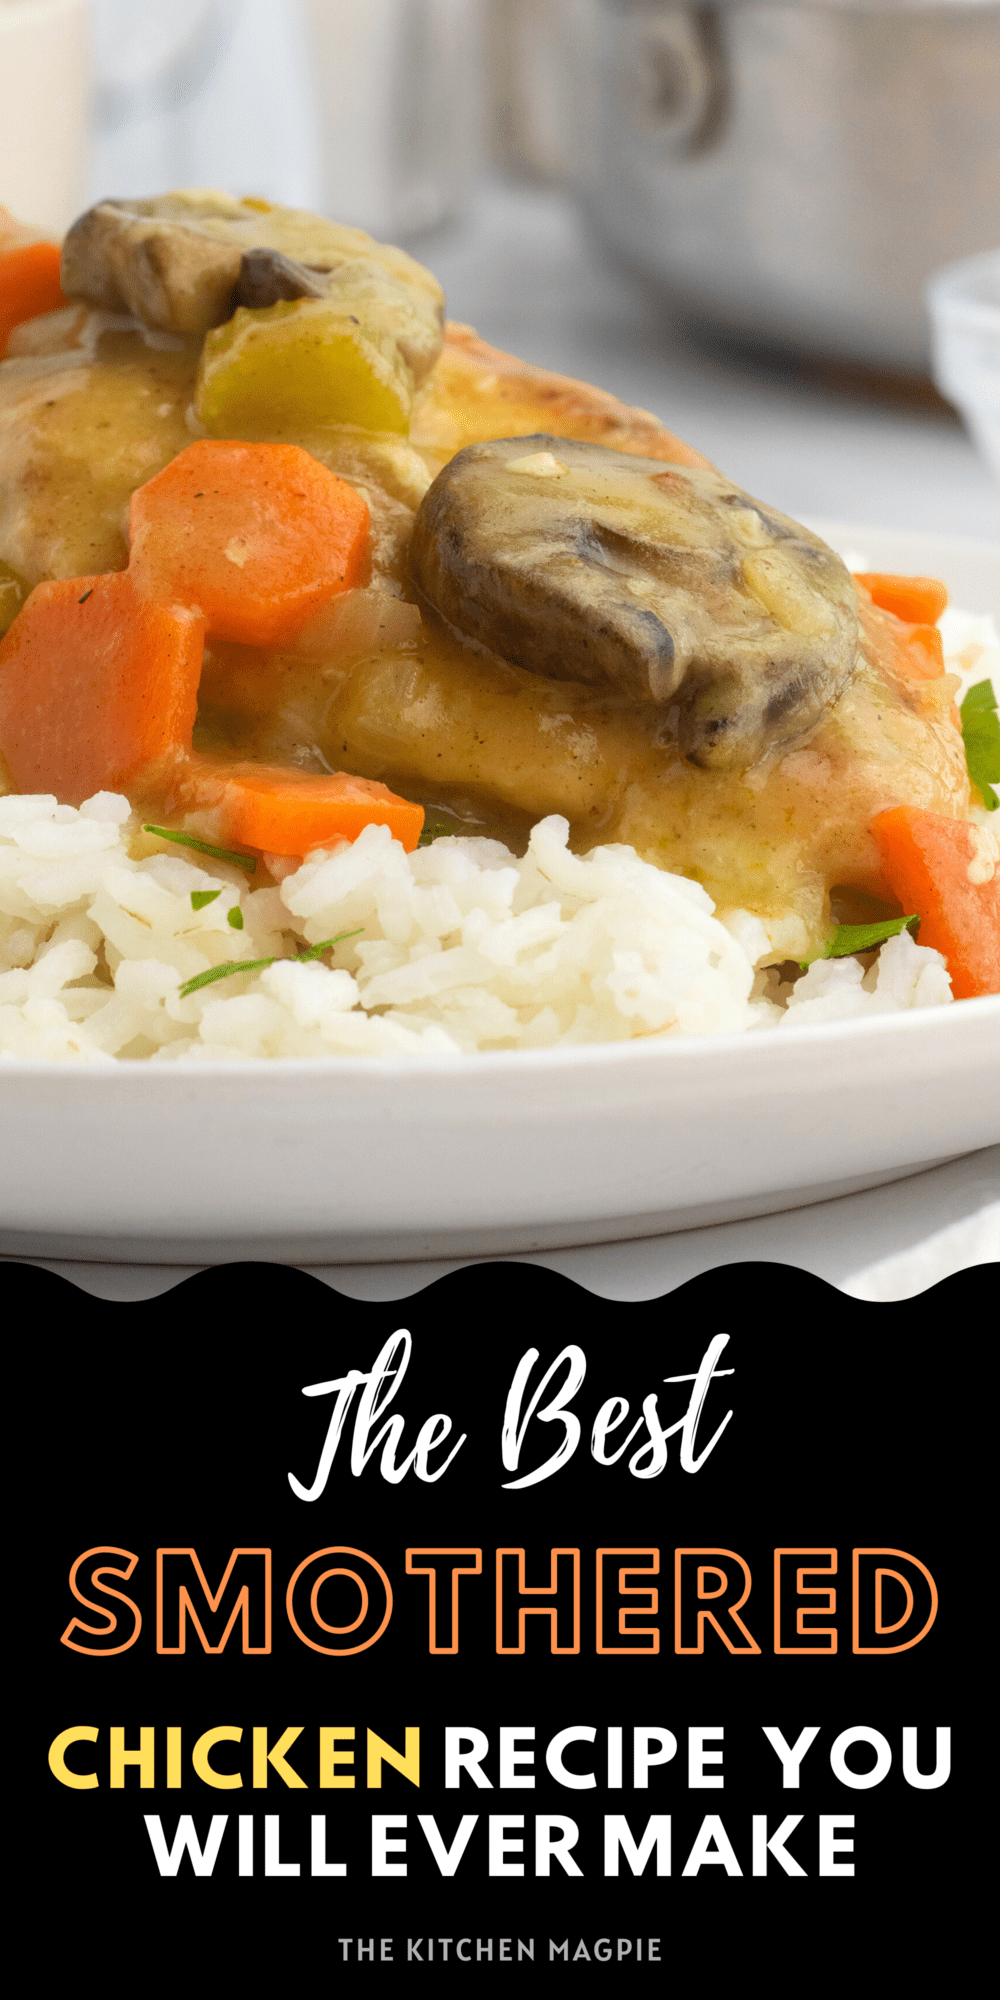 Delicious smothered chicken in a thick, vegetable laden gravy. The perfect meal to serve over rice or pasta!